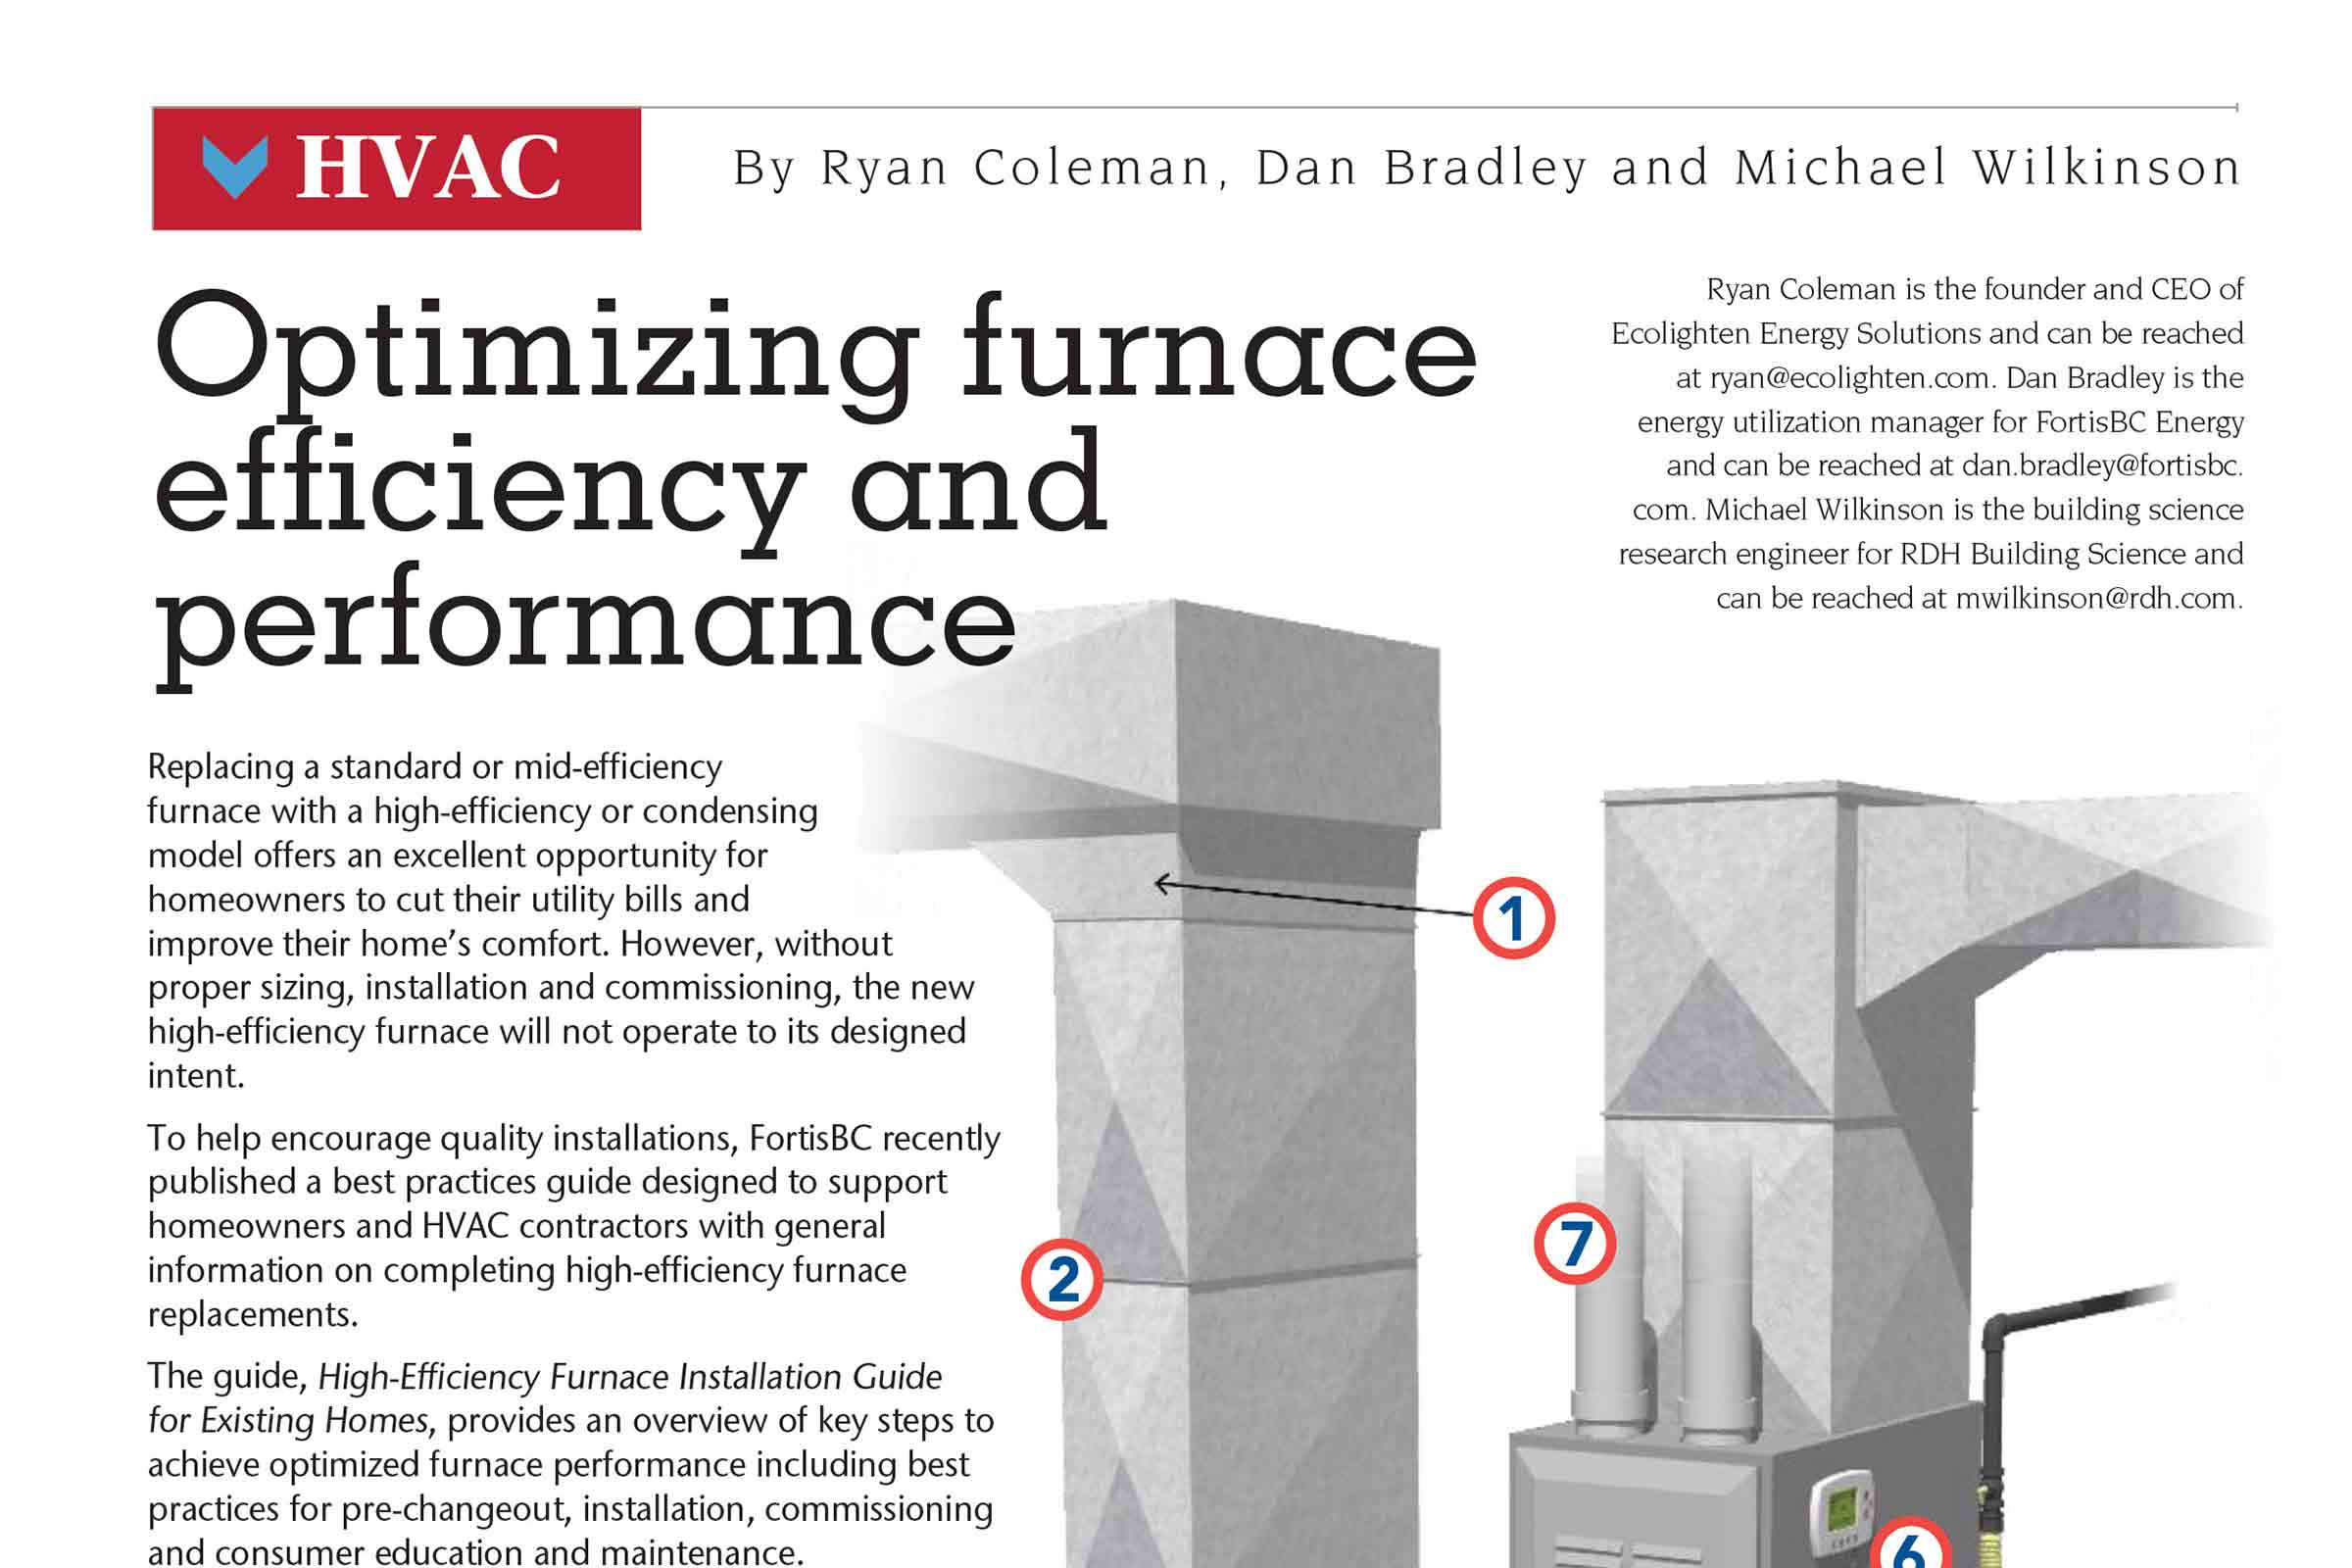 Top Tips for Optimizing HVAC Efficiency